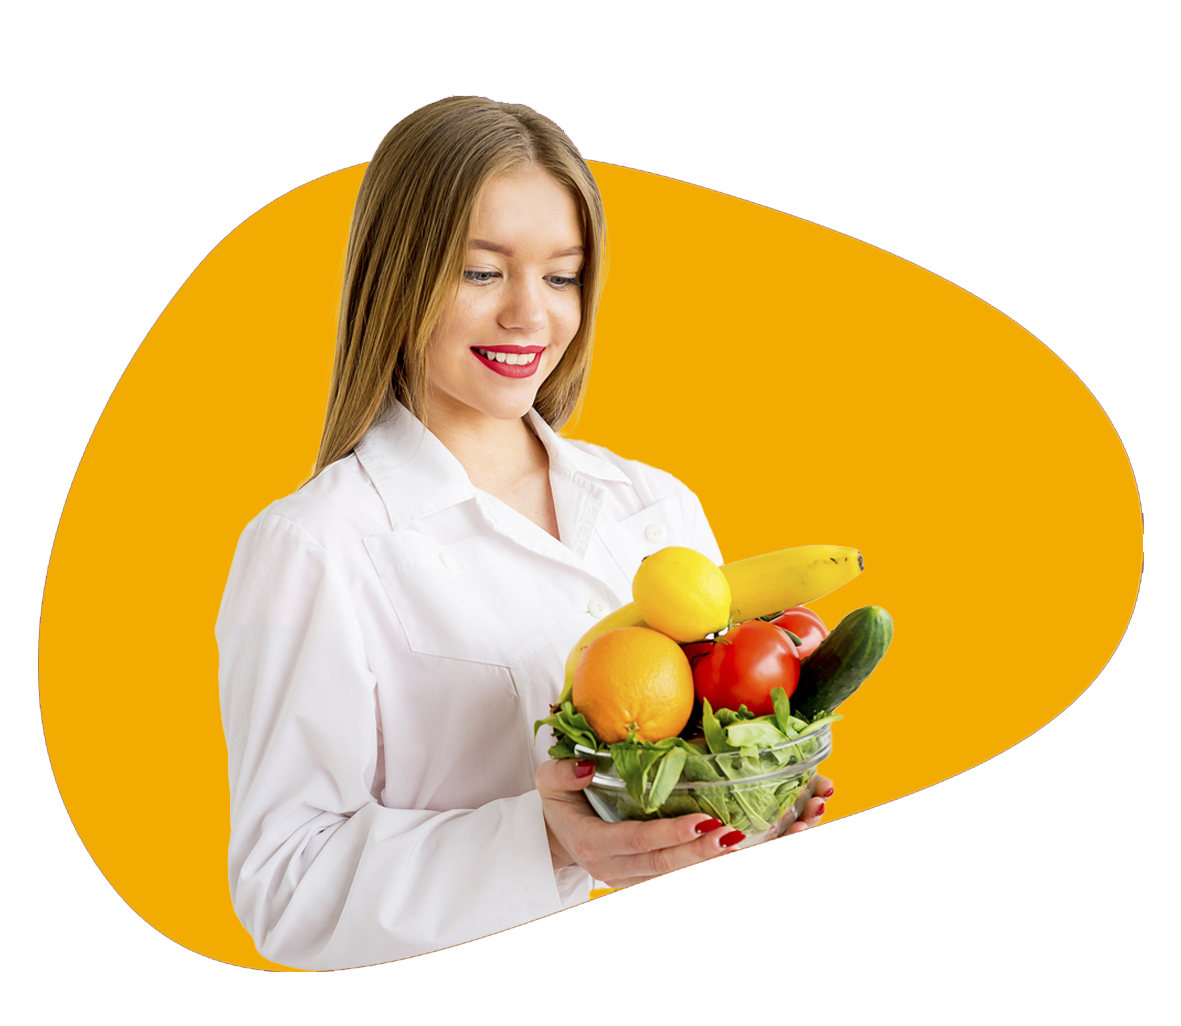 dietitian smiling and holding a bowl of uncut fruits in hands